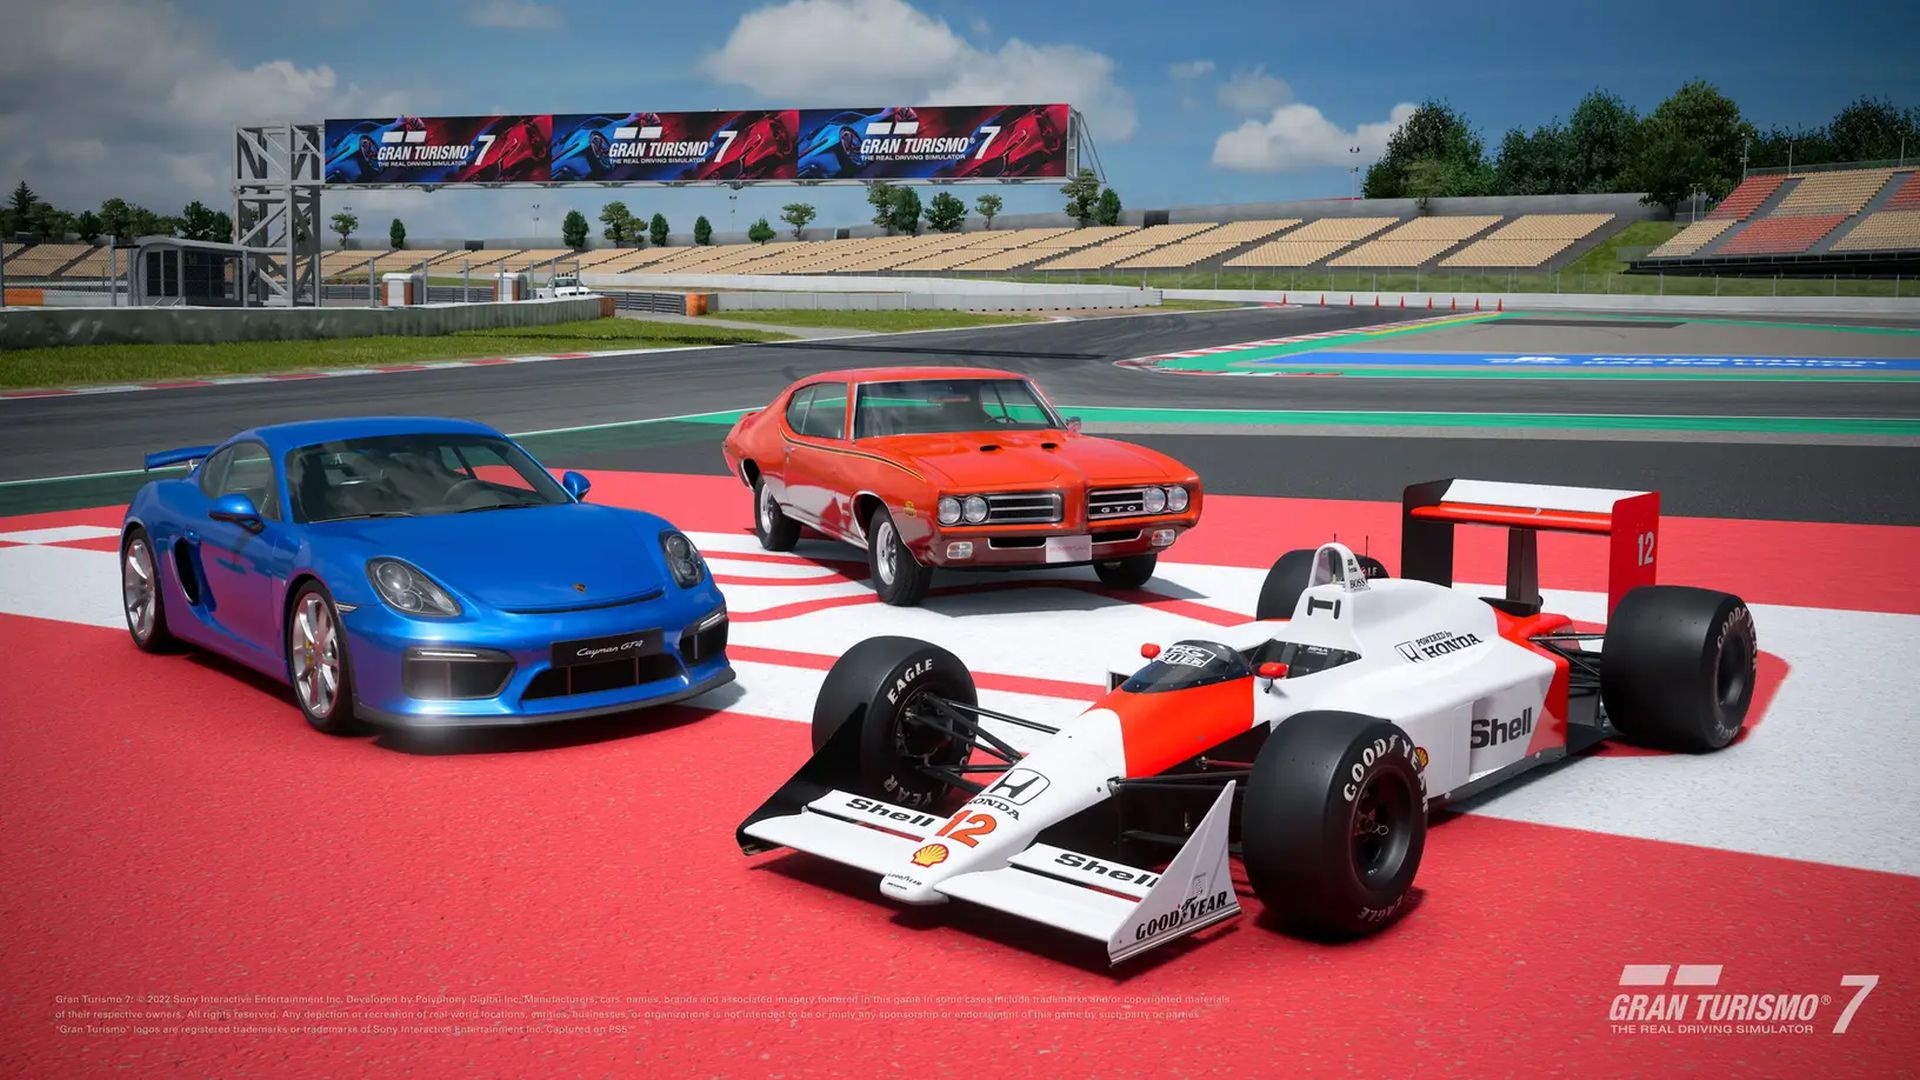 Gran Turismo 7 finally lets you sell your cars